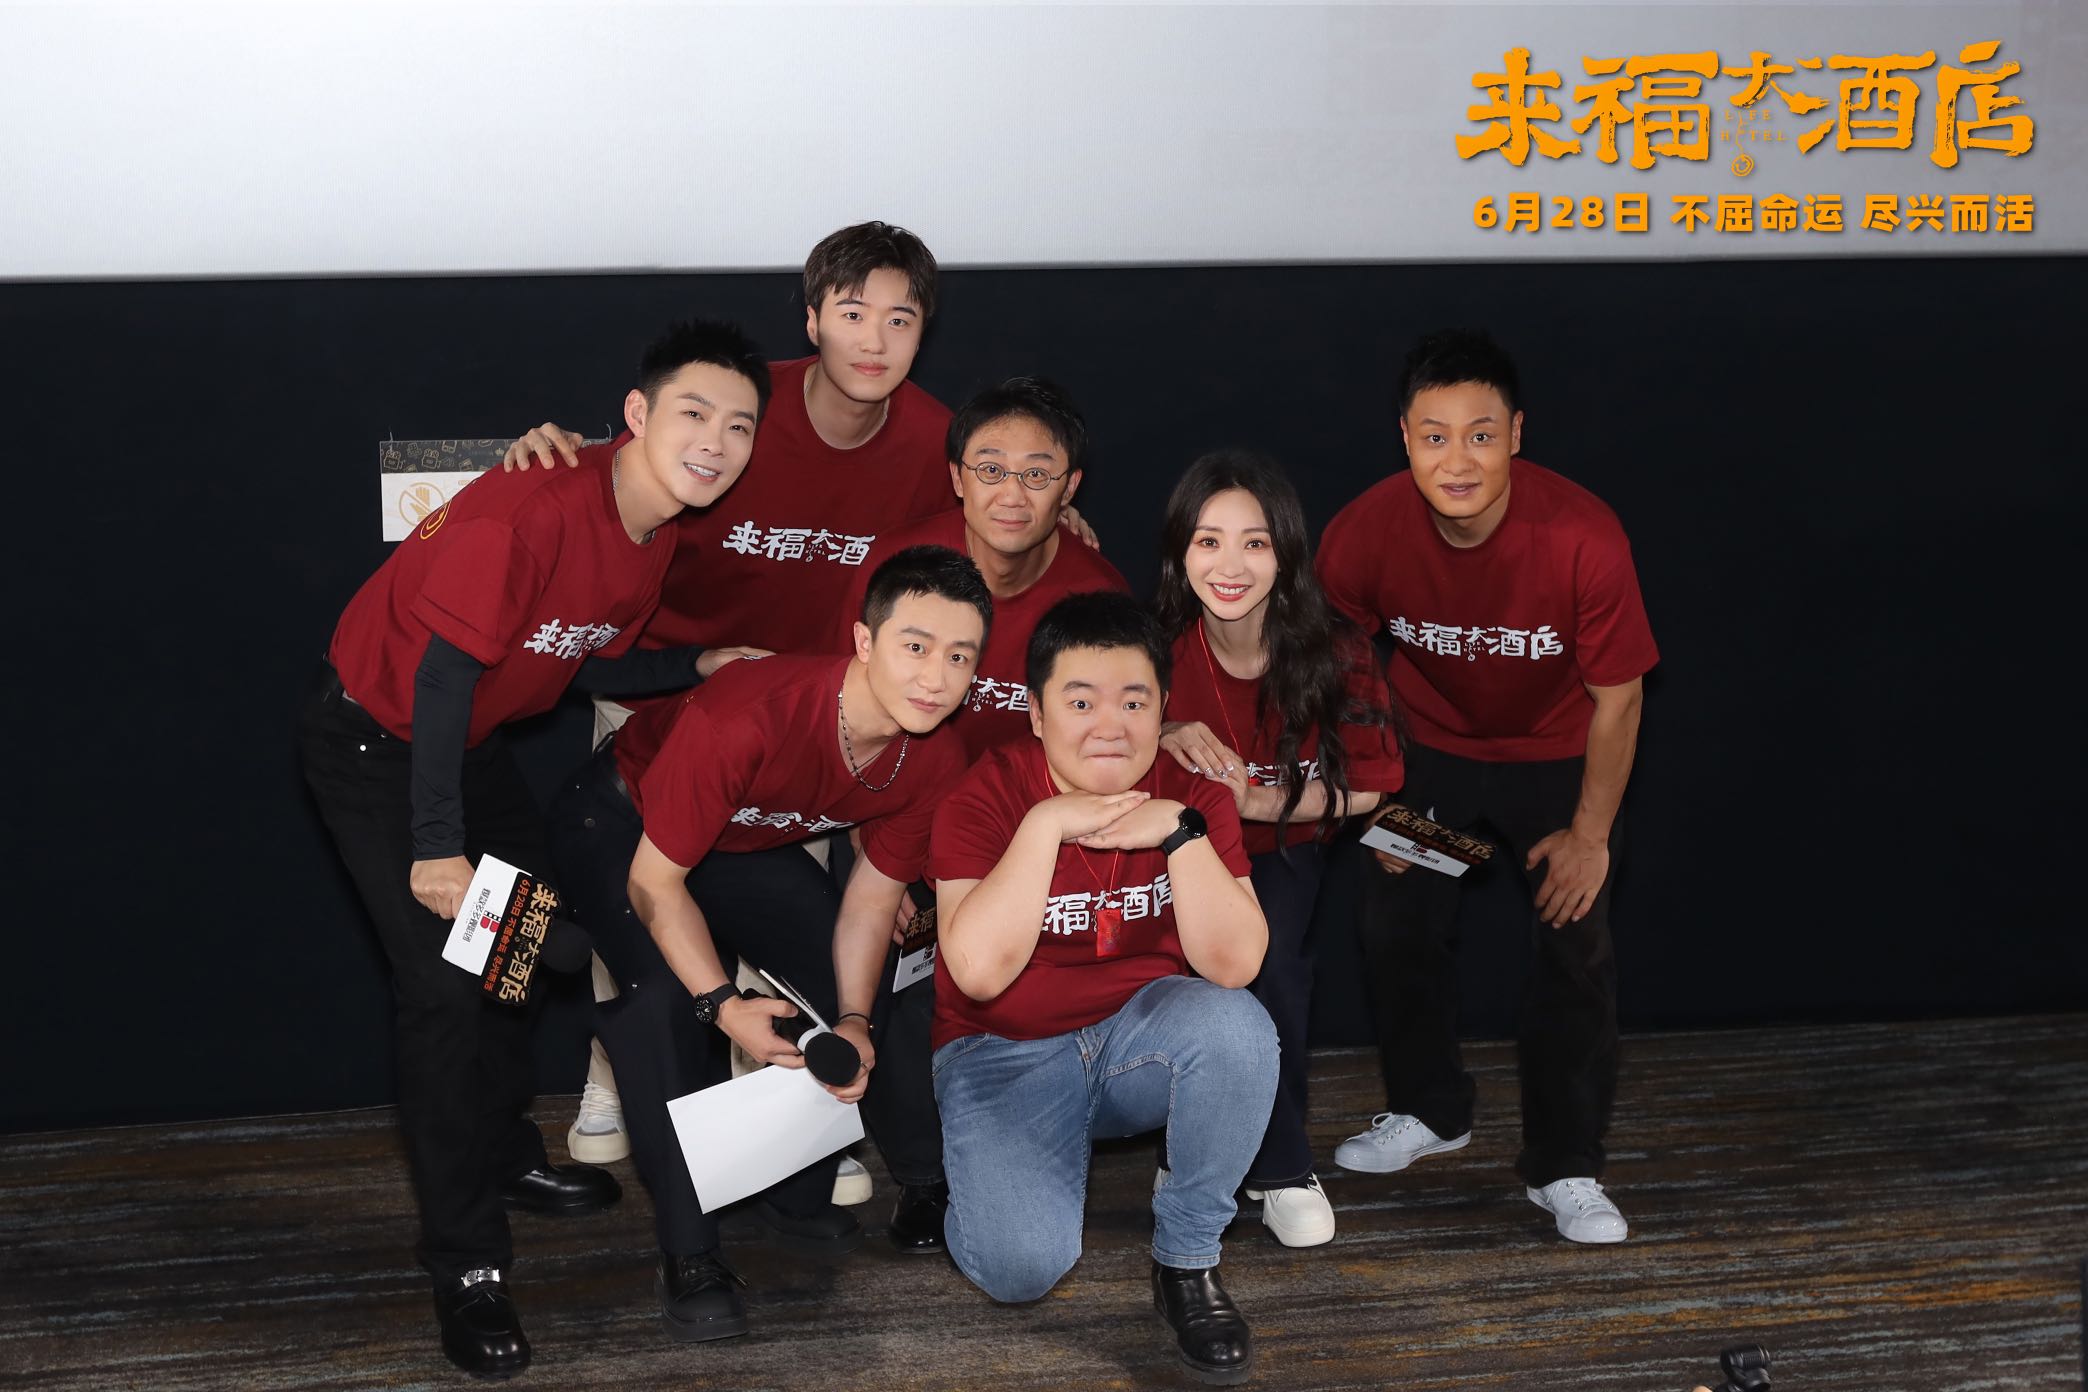  Huang Xuan and Liu Yan lead the film "Laifu Hotel", which has been praised constantly for its advanced viewing